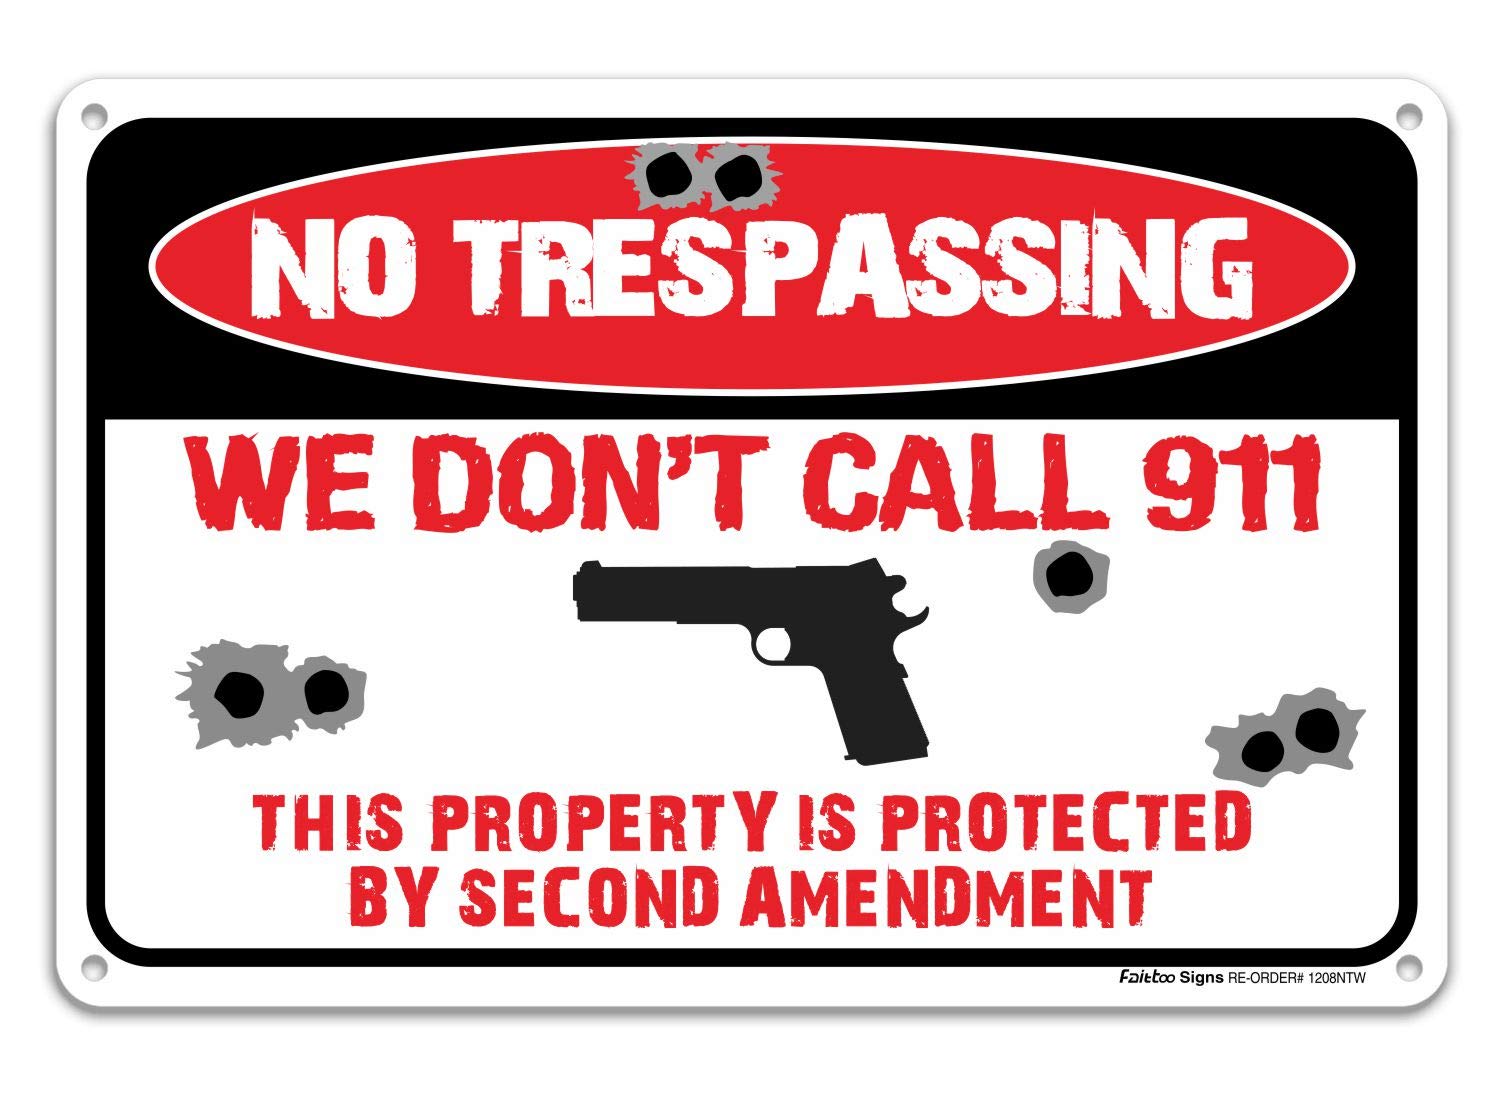 No Trespassing Sign,We Don&#39;t Call 911 Sign,This Property is Protected by Second Amendment Sign,12&#34; x 8&#34; Rust Free .40 Aluminum,UV Protected,Weather Resistant, Waterproof, Durable Ink, Easy to Mount